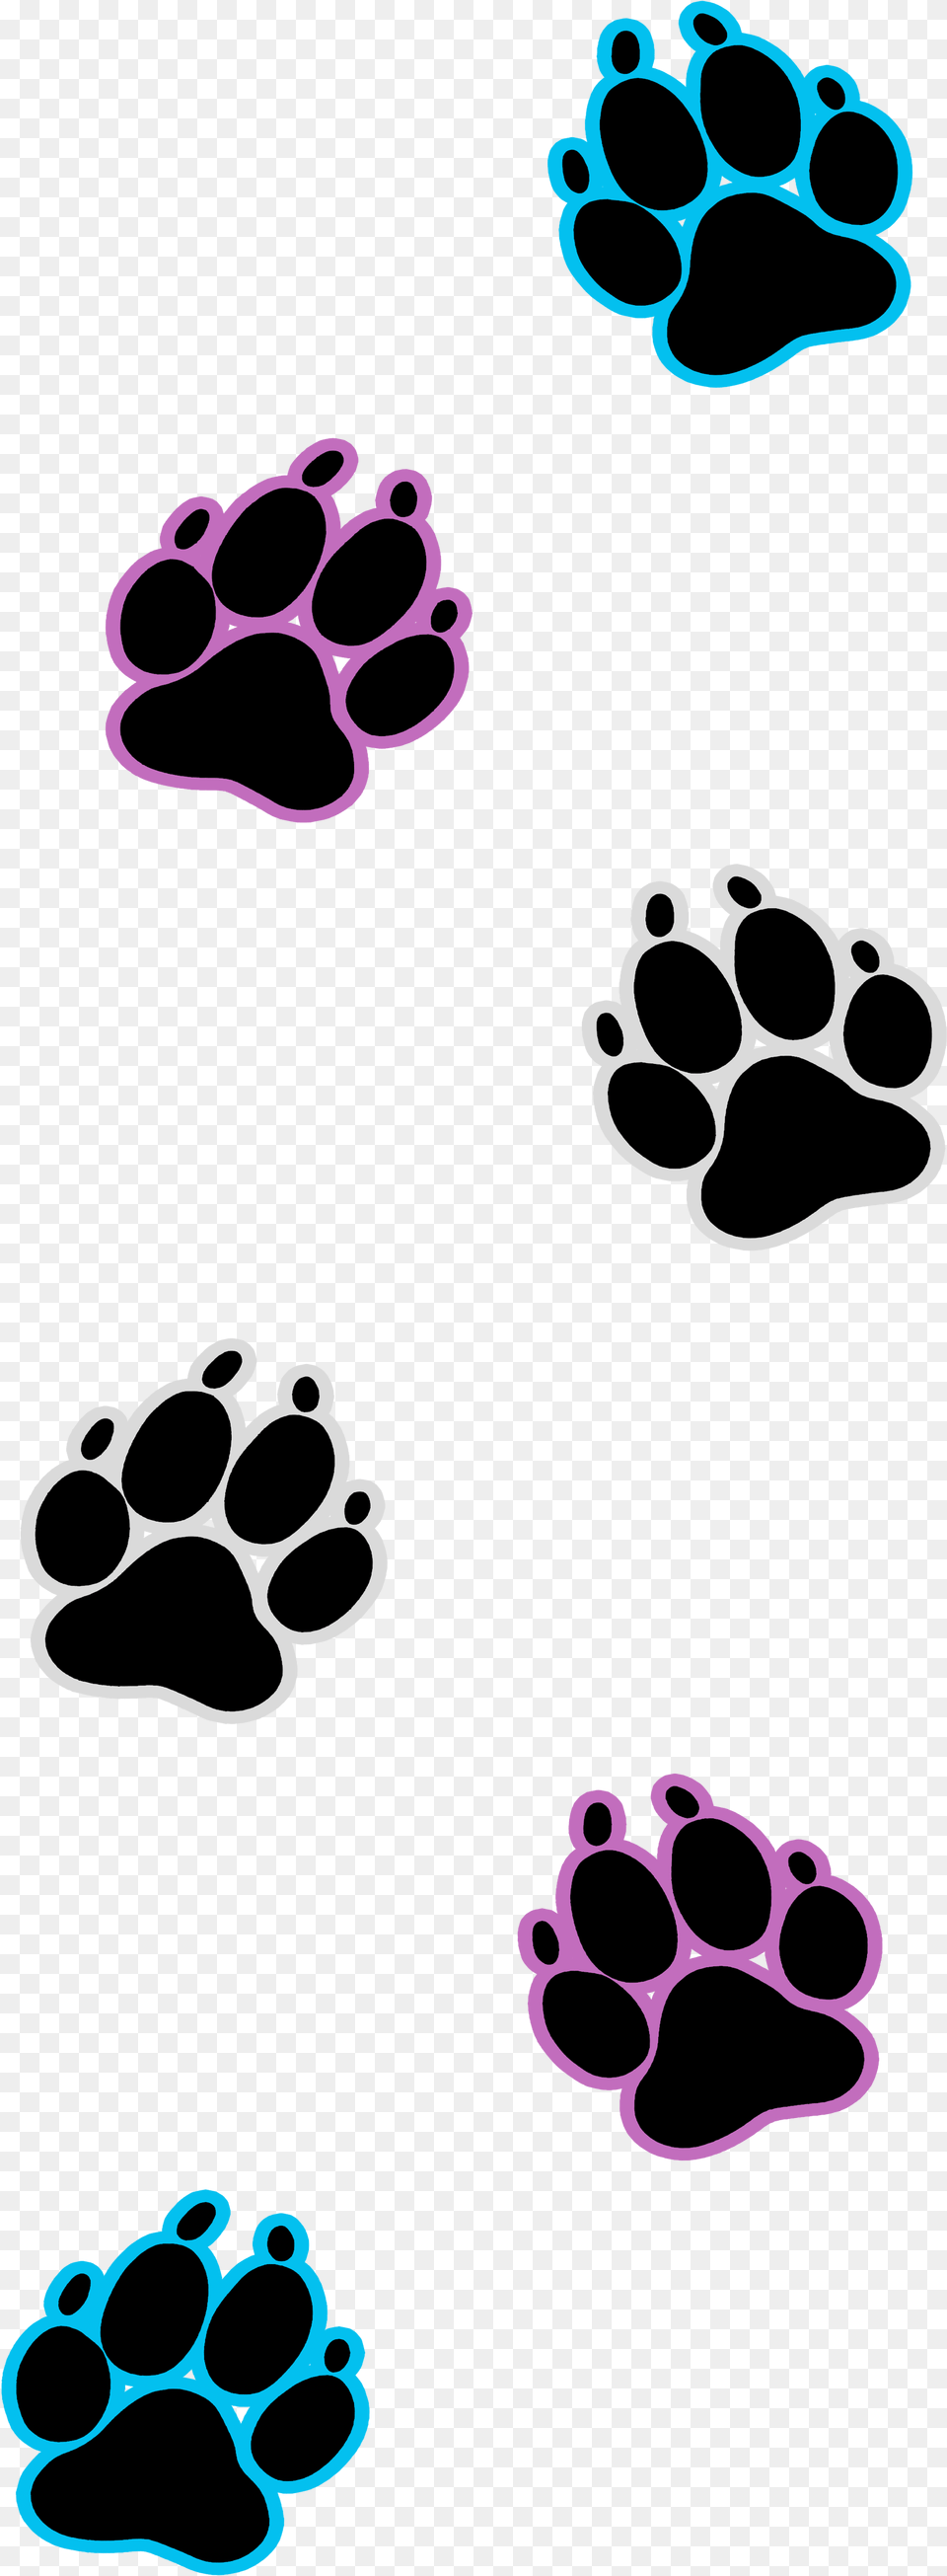 Dog Paw Prints Transparent Amp Clipart Free Download Paw Print Background With Dog, Footprint, Accessories, Glasses Png Image